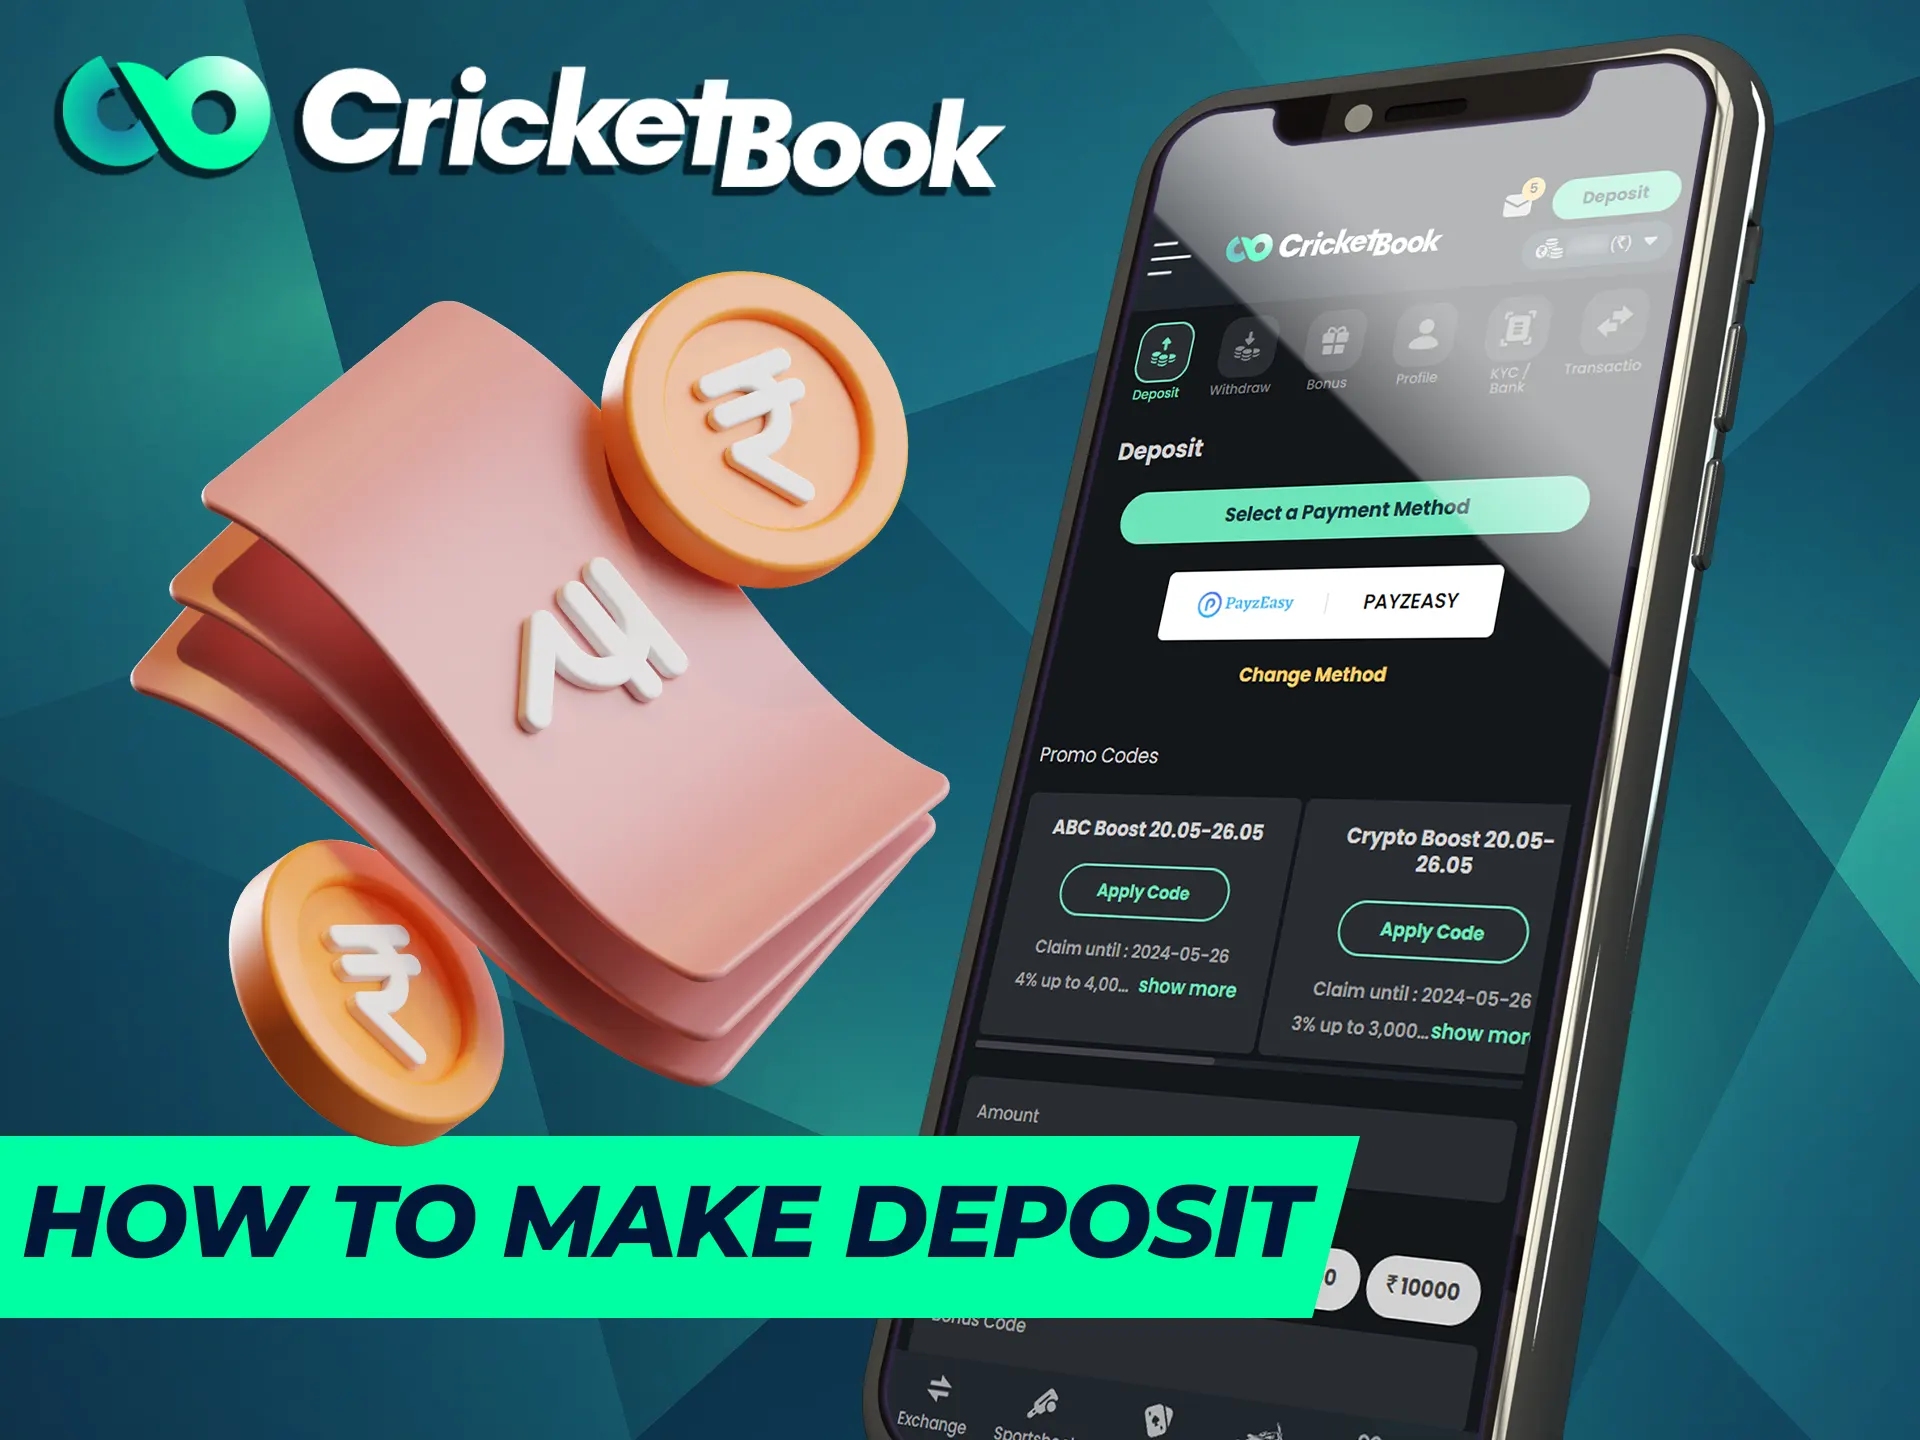 Instructions on how to make a deposit through the CricketBook mobile app.